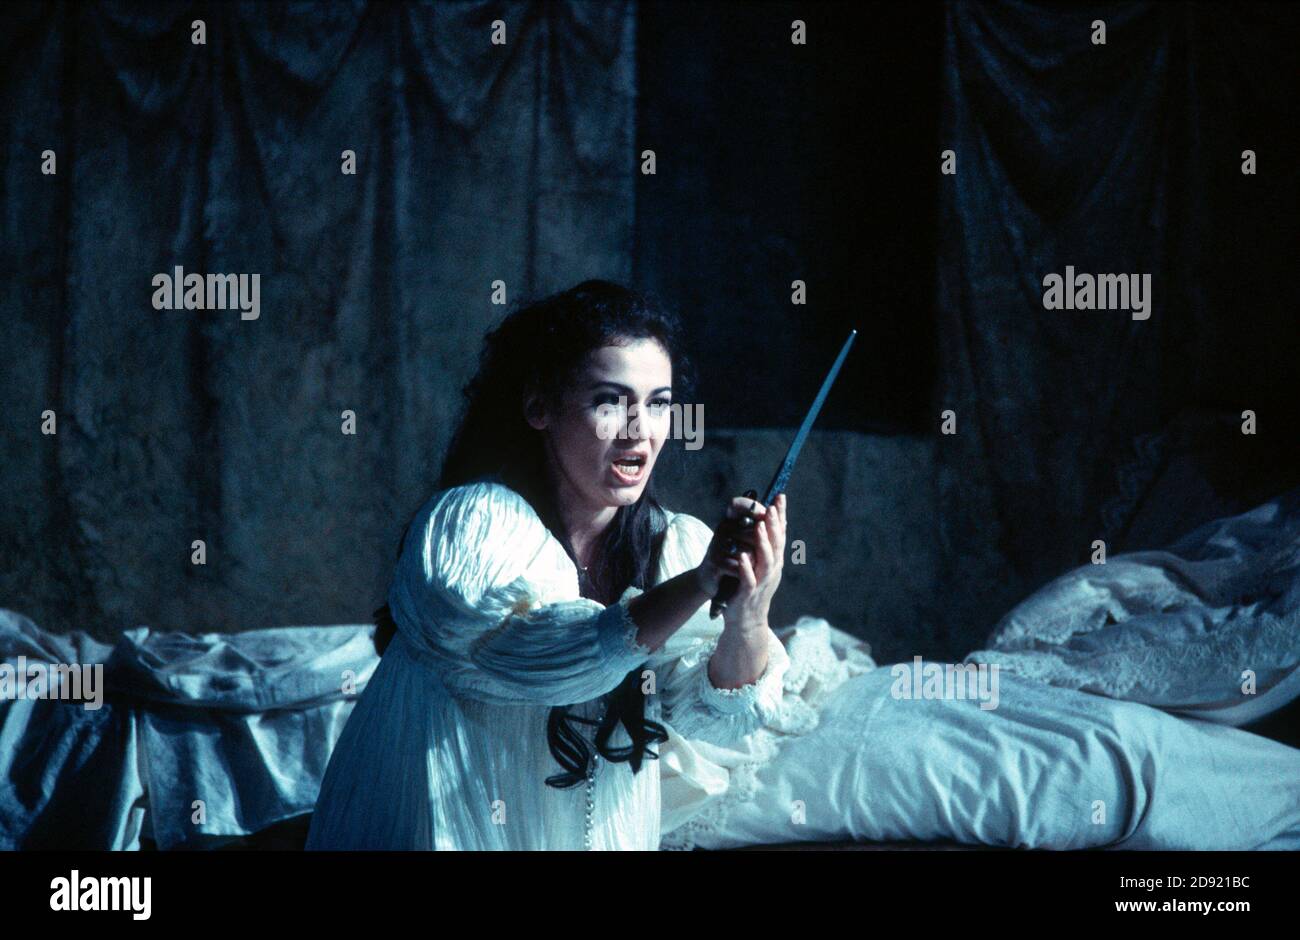 Leontina Vaduva (Juliette) in ROMEO ET JULIETTE at The Royal Opera House, Covent Garden, London WC2  28/10/1994  music: Charles-Francois Gounod  libretto: Jules Barbier & Michel Care after Shakespeare  conductor: Charles Mackerras  design: Carlo Tommasi  lighting: Bruno Boyer  director: Nicolas Joel Stock Photo